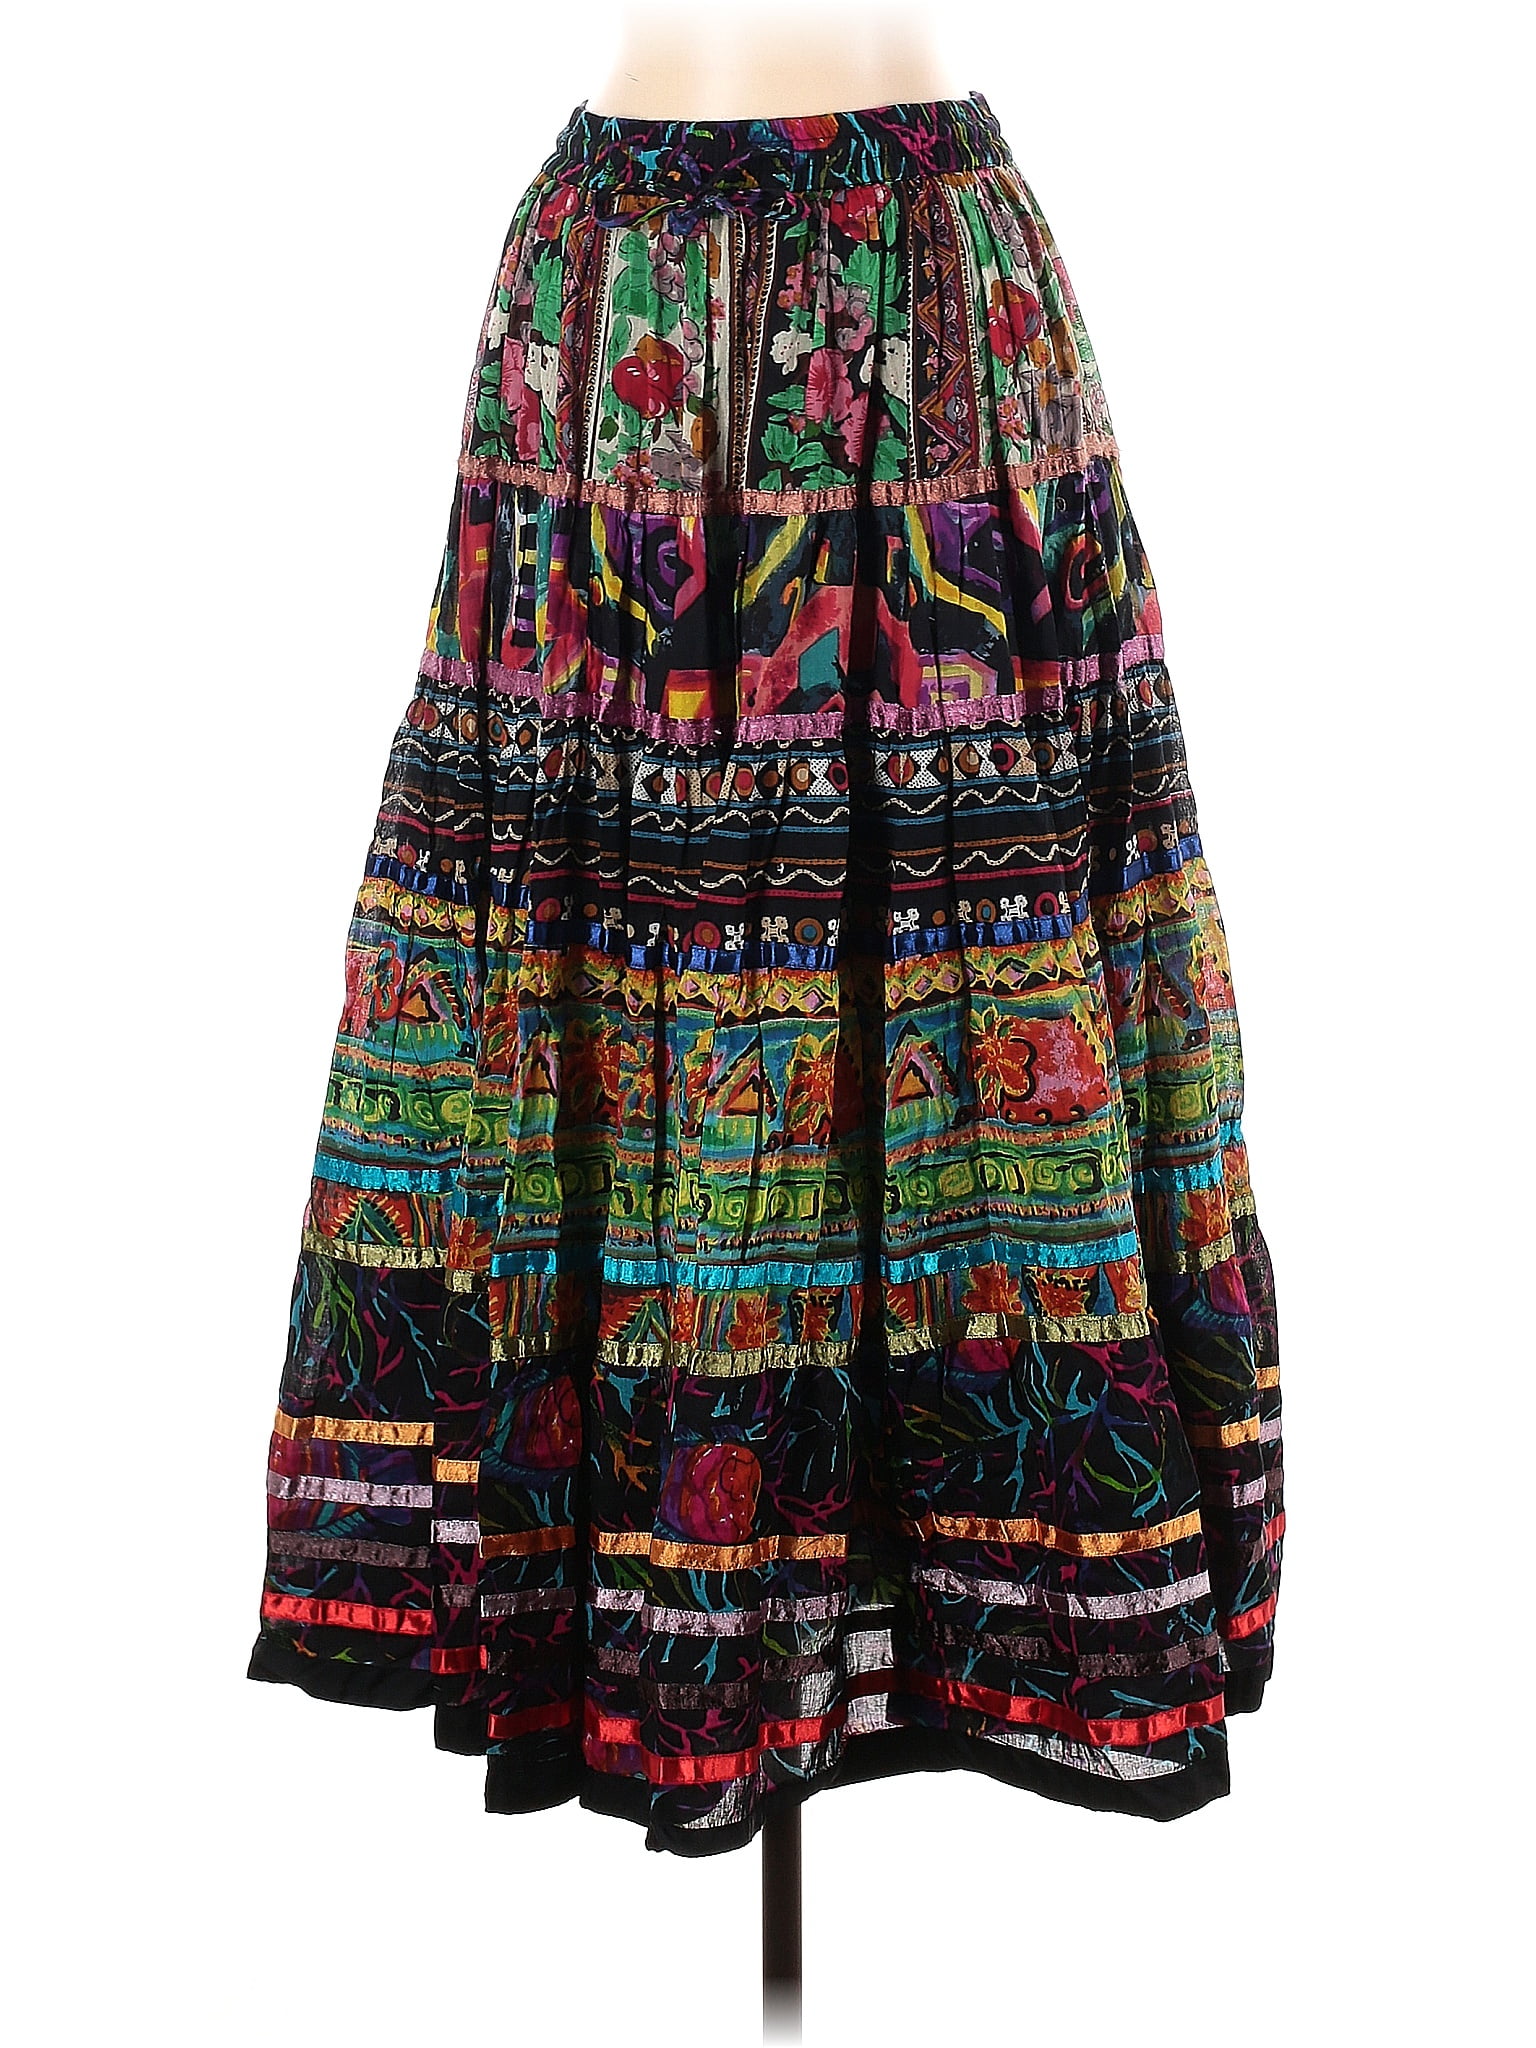 Travel Smith 100% Cotton Multi Color Black Casual Skirt Size S